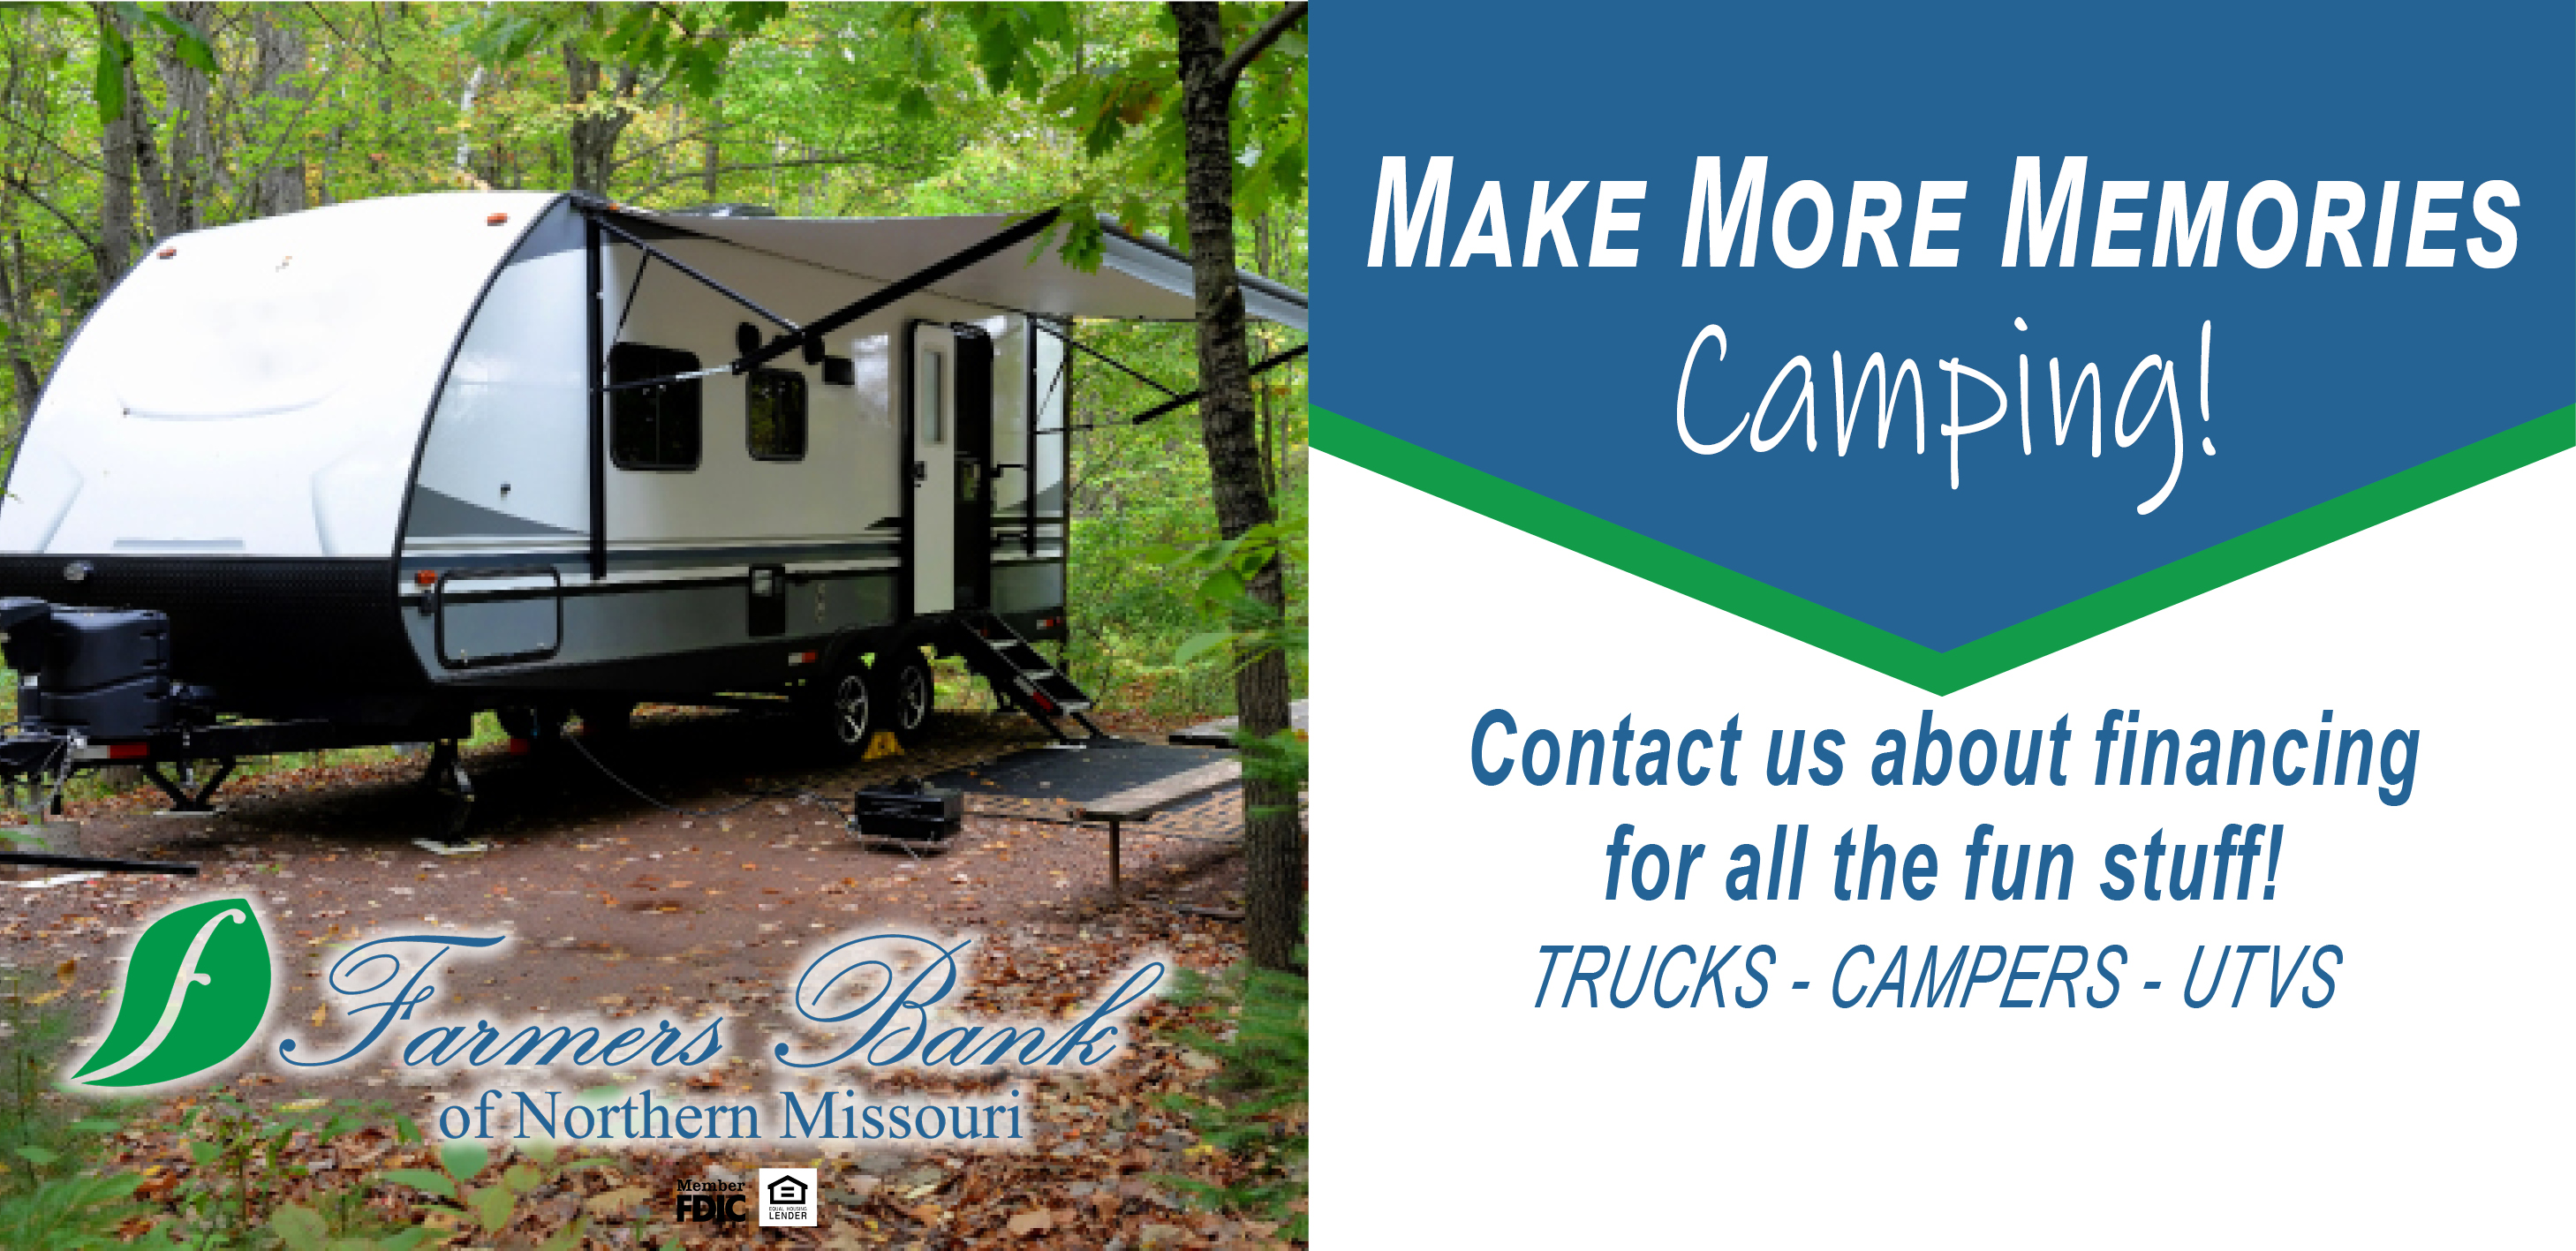 Make More Memories Camping. Contact us about financing for all the fun stuff! Trucks. Campers. UTVs, Farmers Bank of Northern Missouri, Member FDIC, Equal Housing Lender.